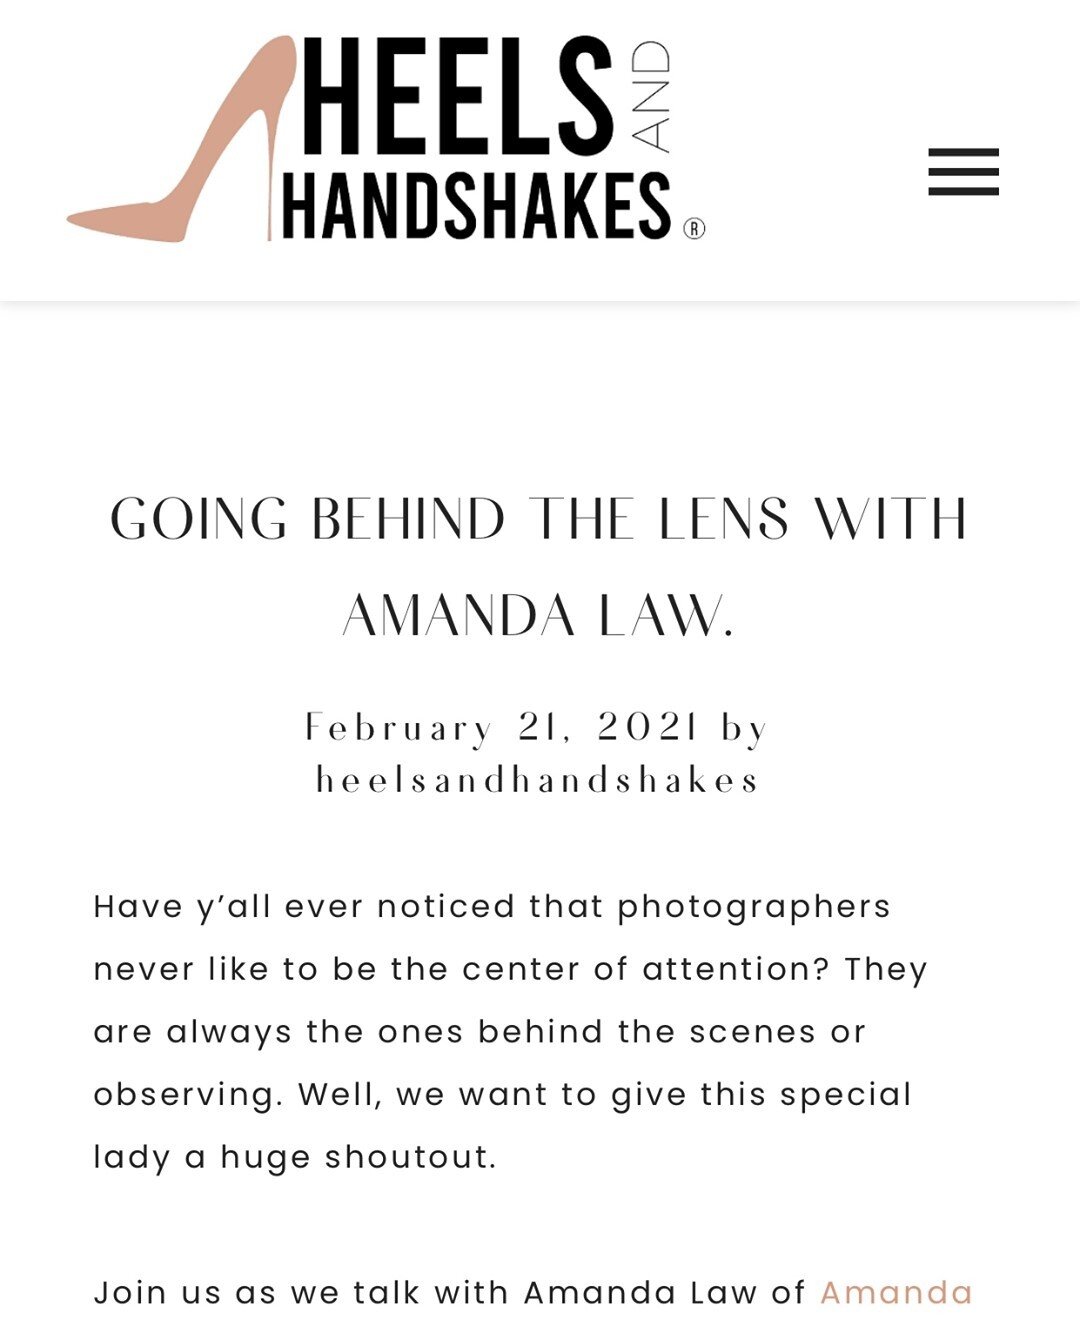 Happy Monday!  Mondays can be tough, but a bit of bright news can just turn this day around for me!  How about you? ⁠
⁠
This week I got featured in the Meet a Member post on the Heels and Handshakes website!  If you know me, we've talked about Heels 